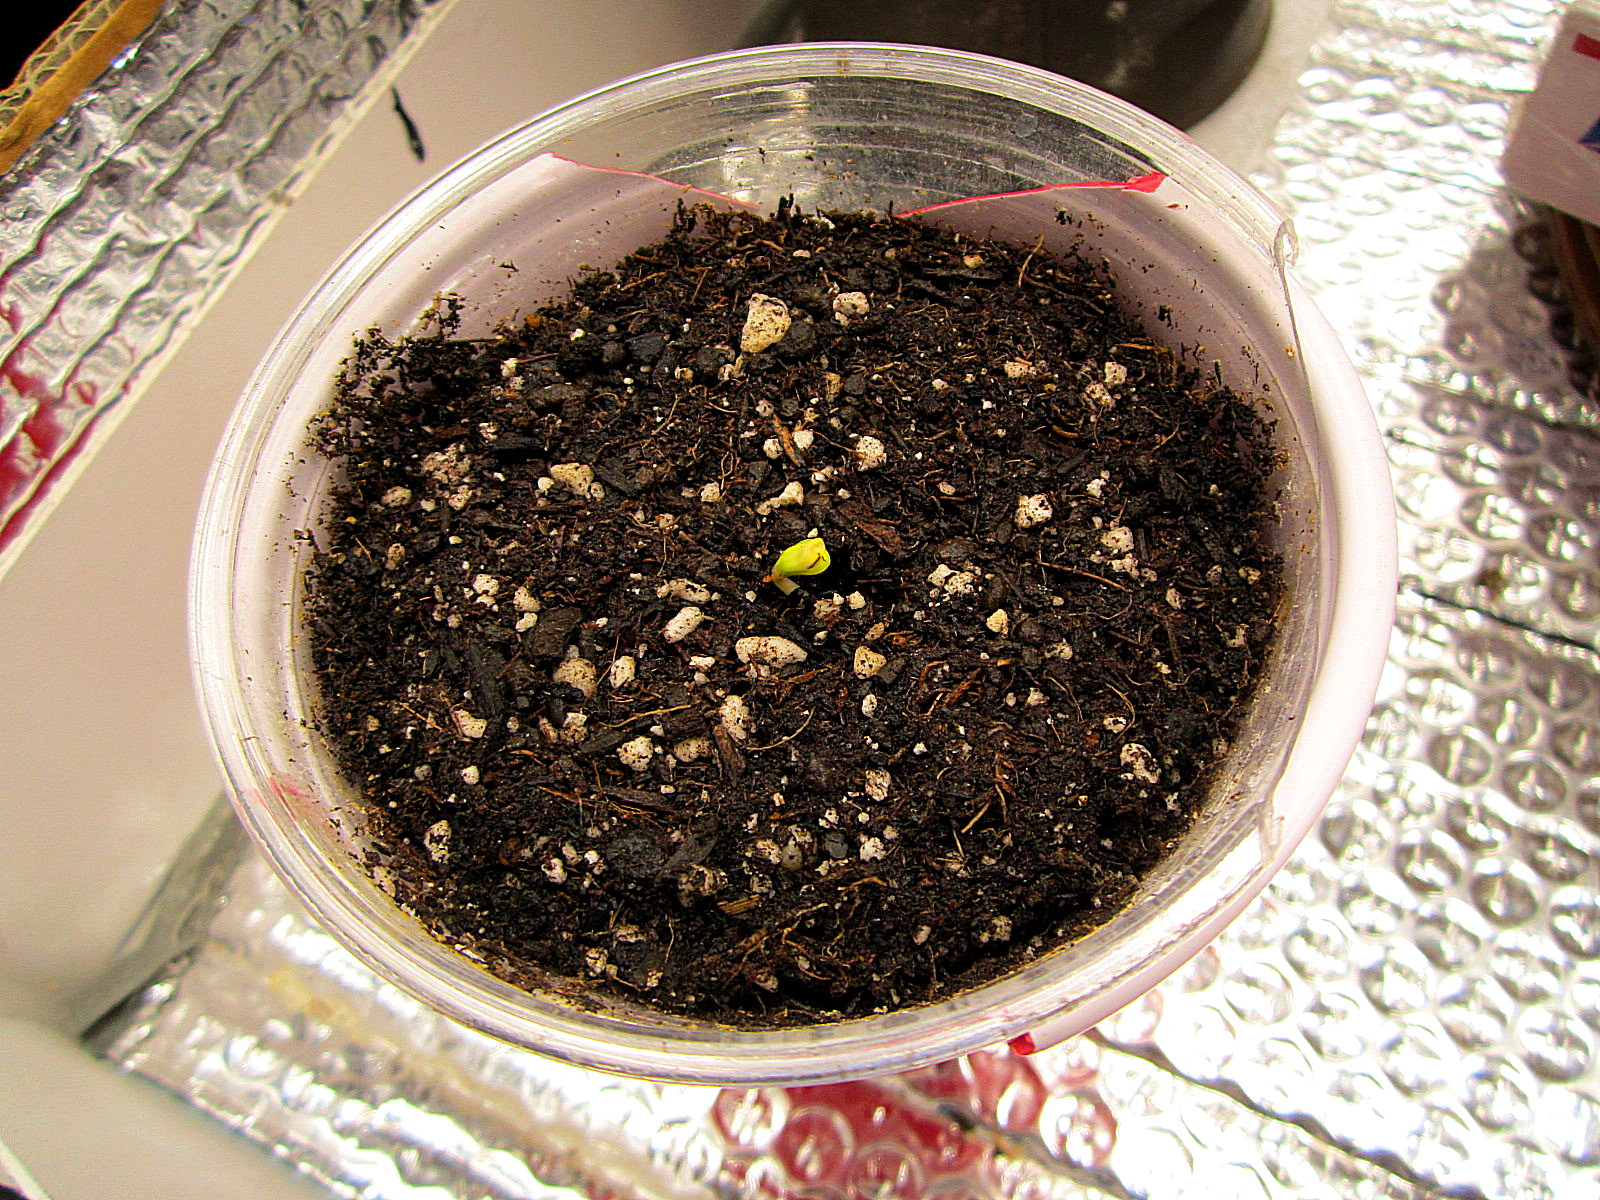 Northern Light sprout 3-10-21.jpg